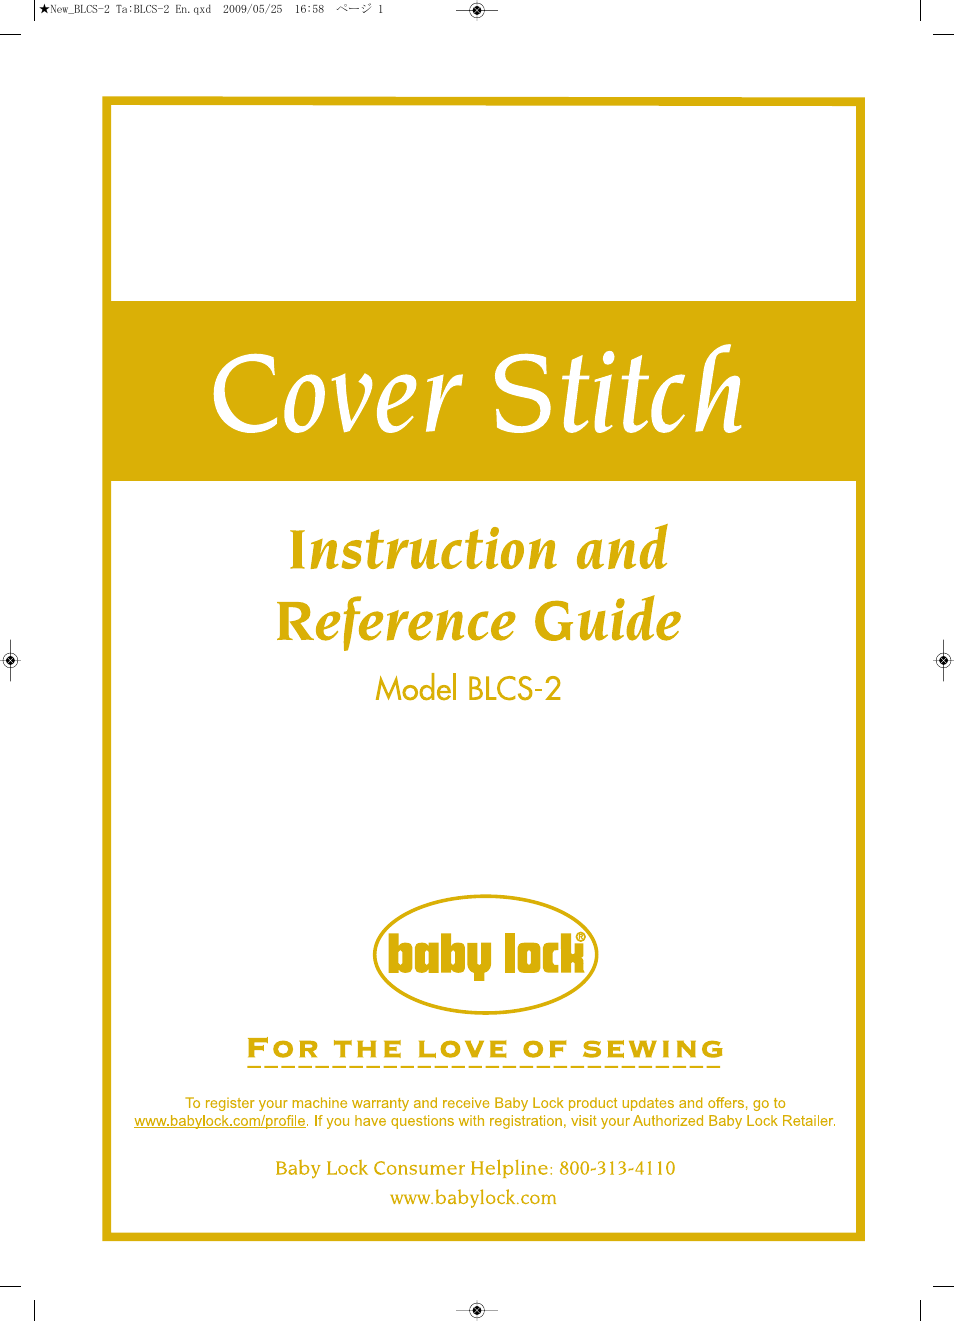 Cover Stitch (BLCS-2) Instruction and Reference Guide